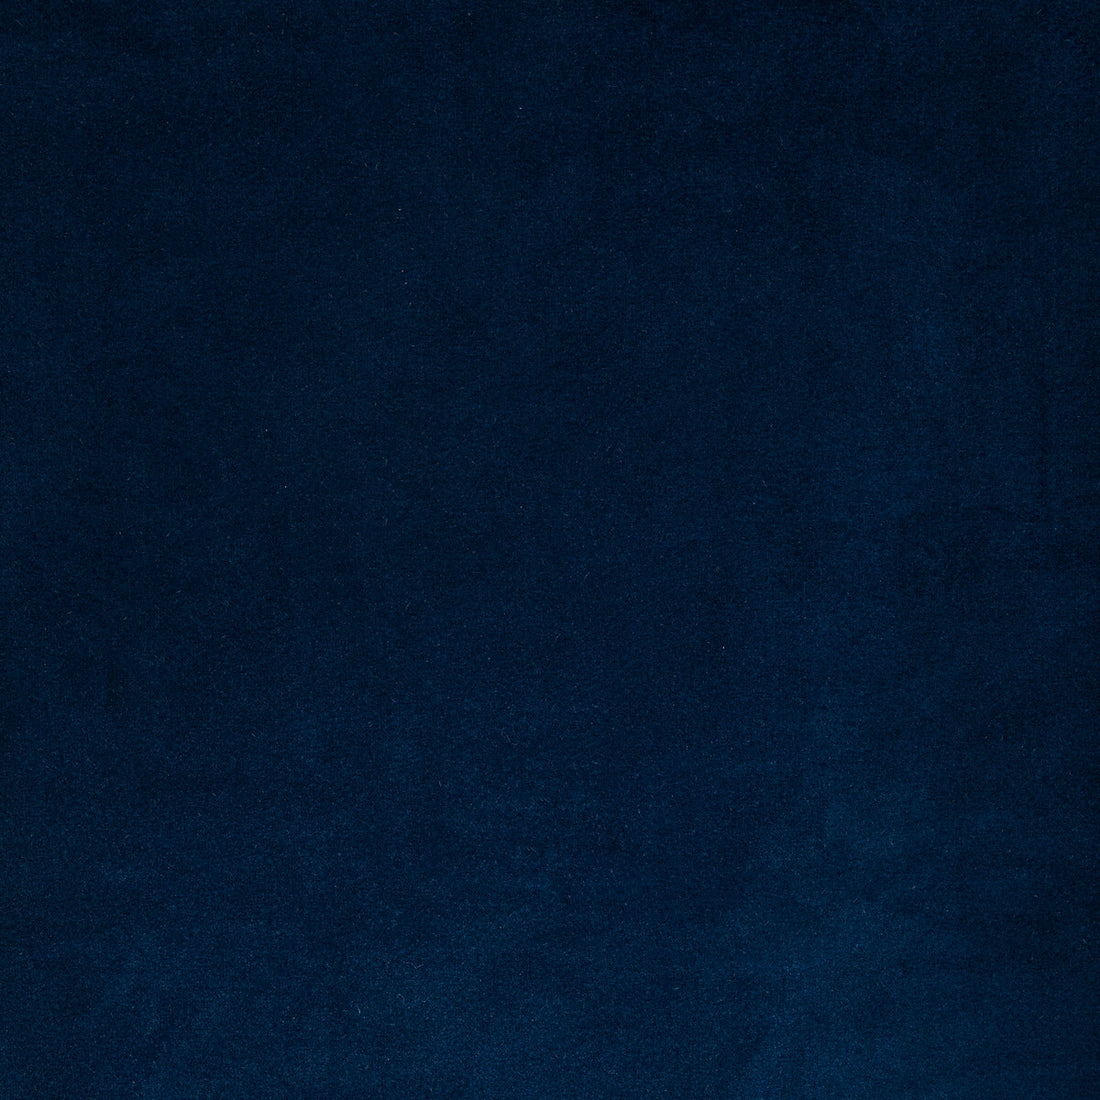 Rocco Velvet fabric in cobalt color - pattern 36652.50.0 - by Kravet Contract